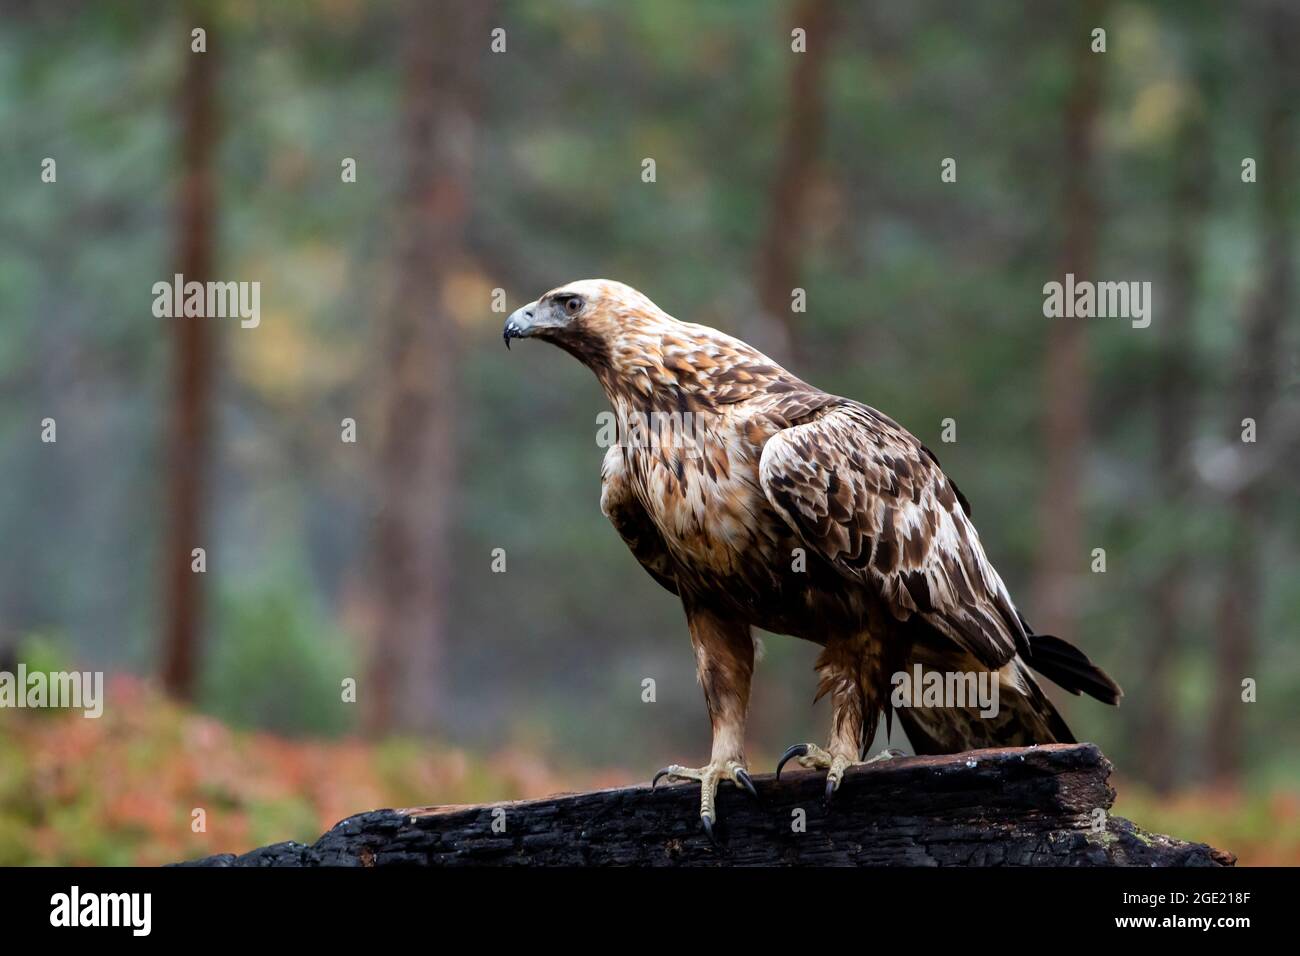 Majestic adult raptor Golden eagle, Aquila chrysaetos perched on a burnt tree during autumn foliage in Finnish taiga forest in Northern Europe Stock Photo